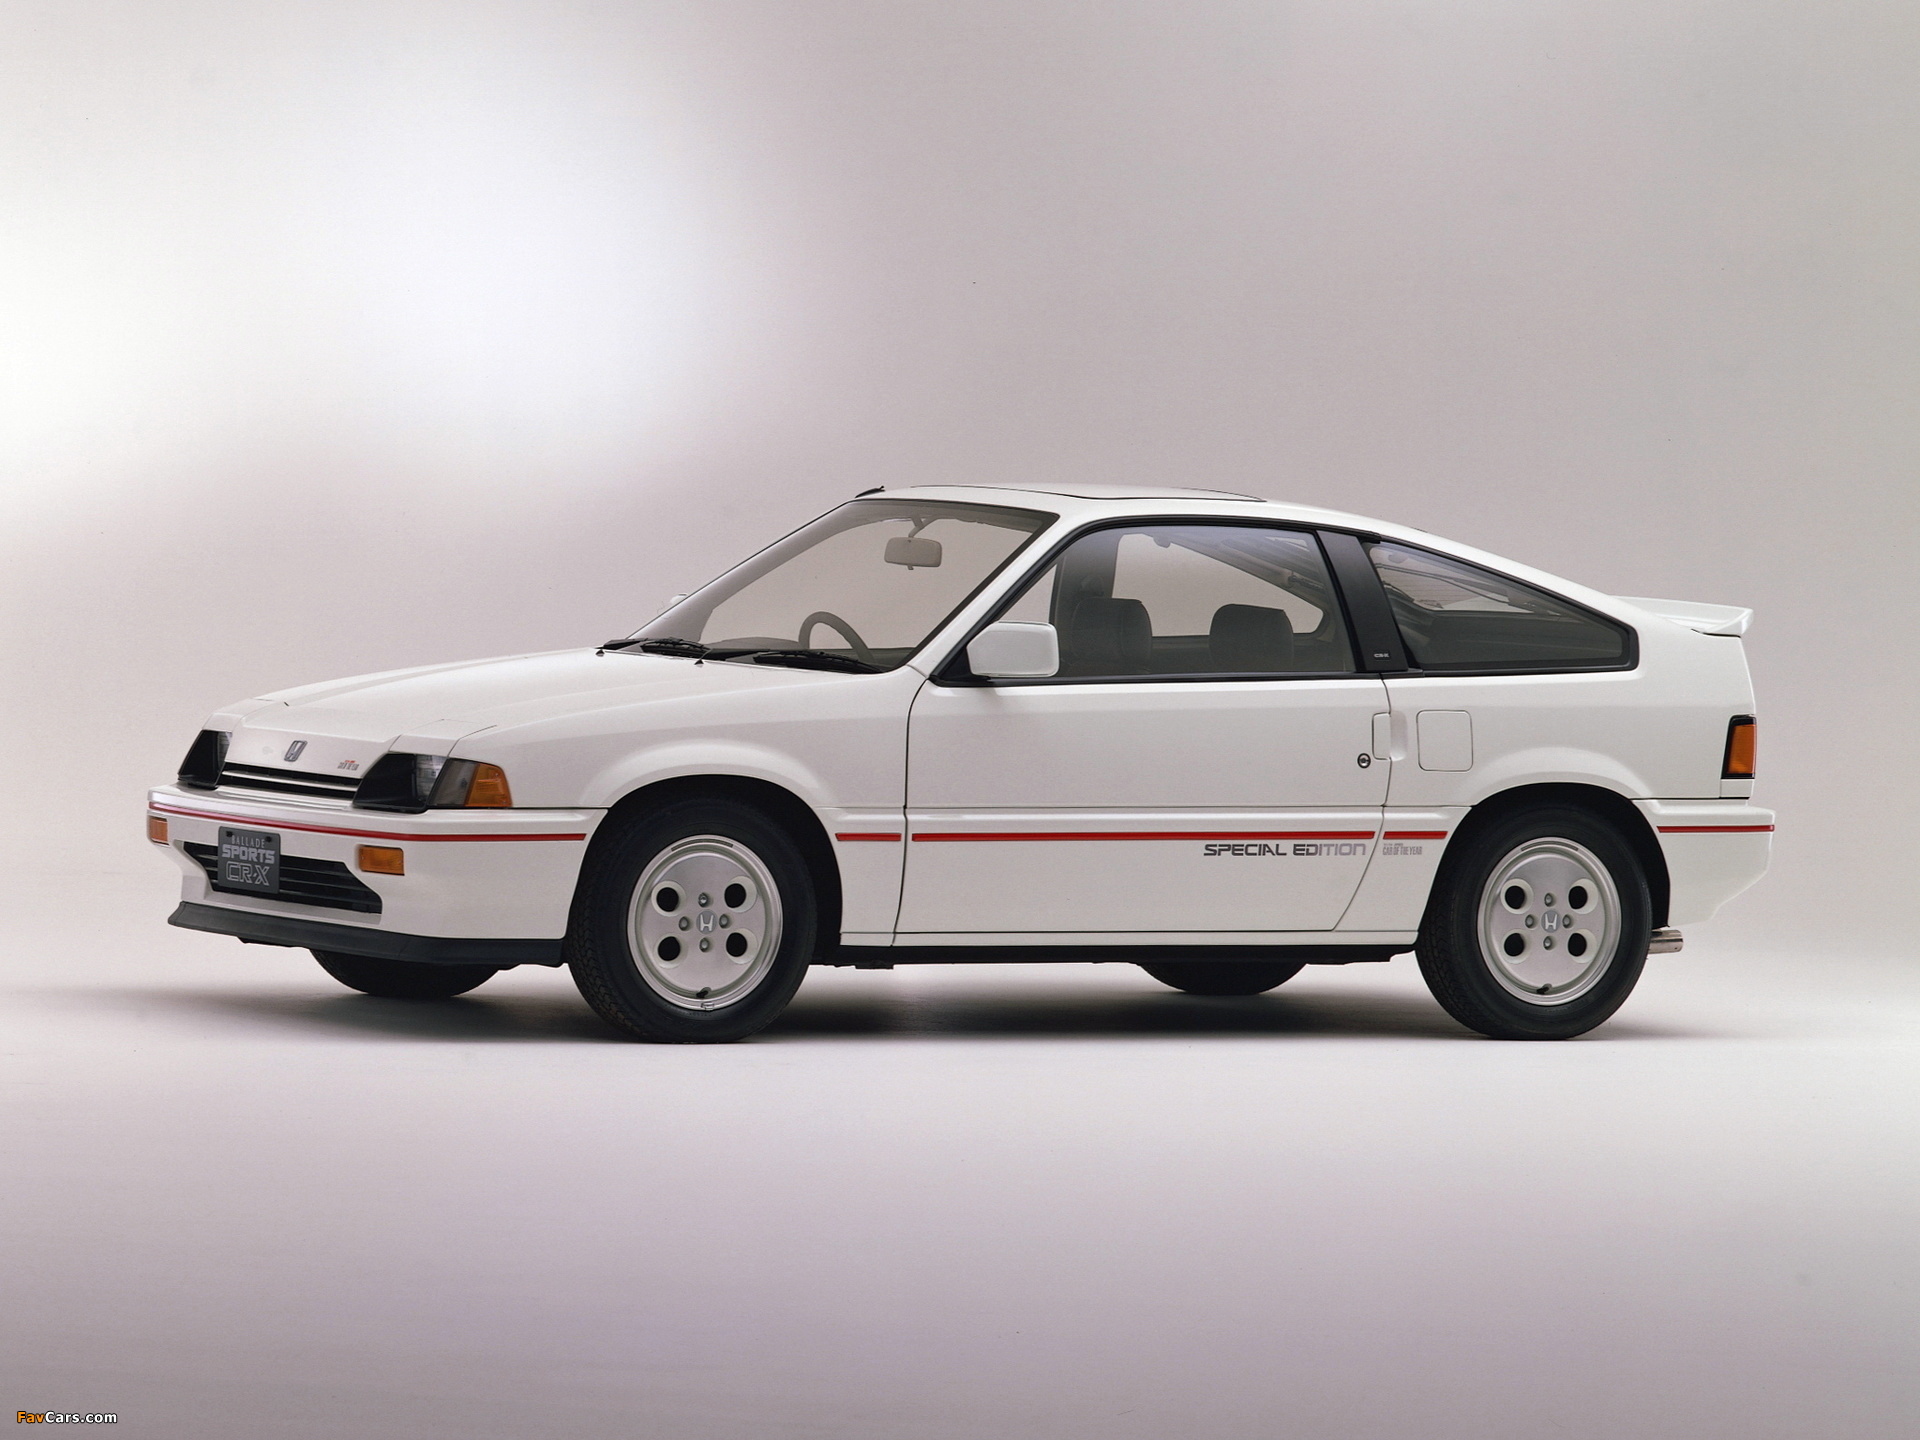 Honda Ballade Sports CR-X Special Edition 1984 pictures (1920 x 1440)